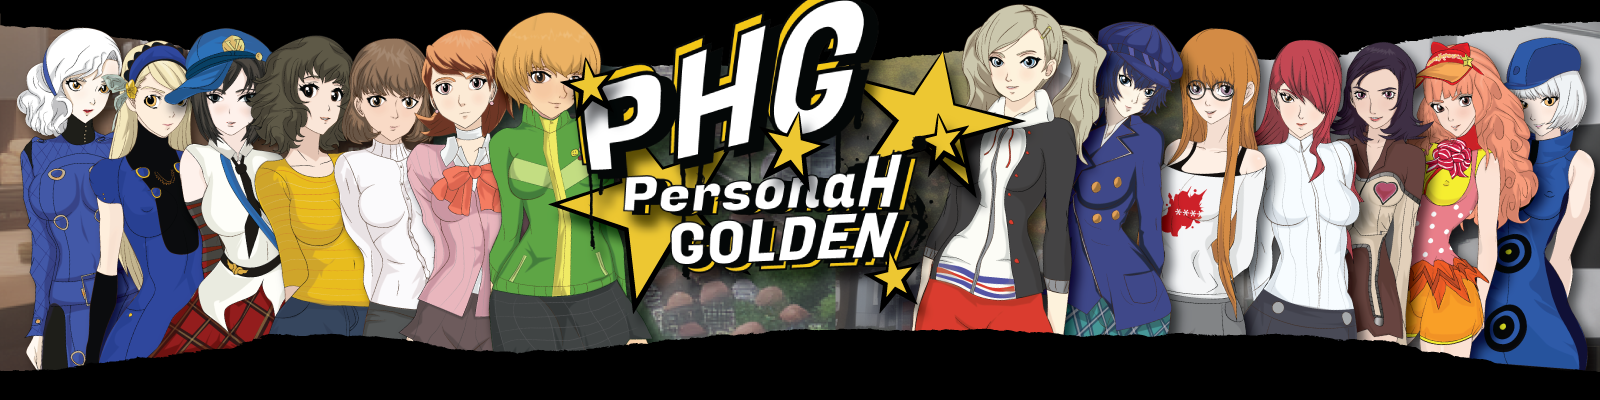 [18+ EN] Persona H Golden – Persona Phiên Bản 18+ | Android, PC